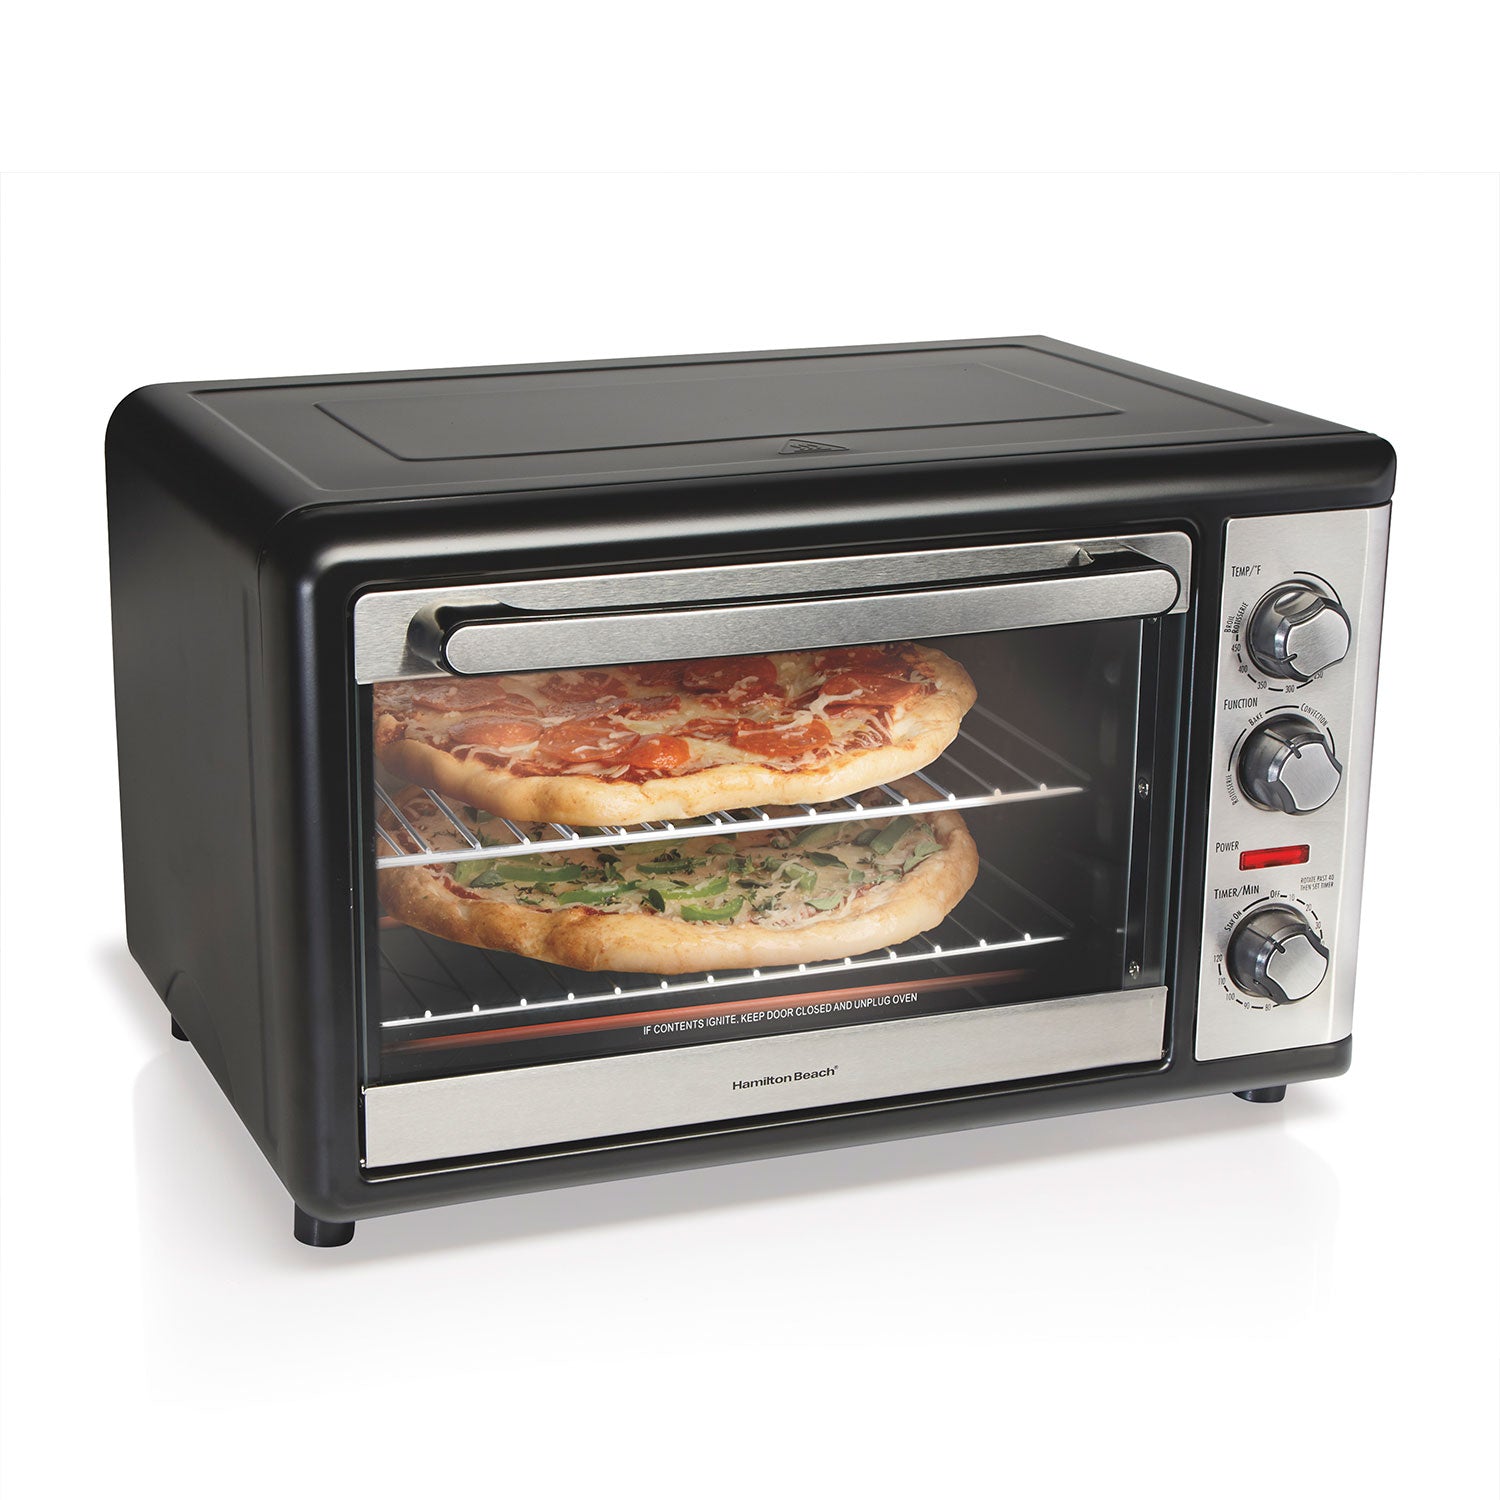 https://cdn.shopify.com/s/files/1/2554/0310/products/countertop-oven-with-convection-and-rotisserie-31108.jpg?v=1669995240